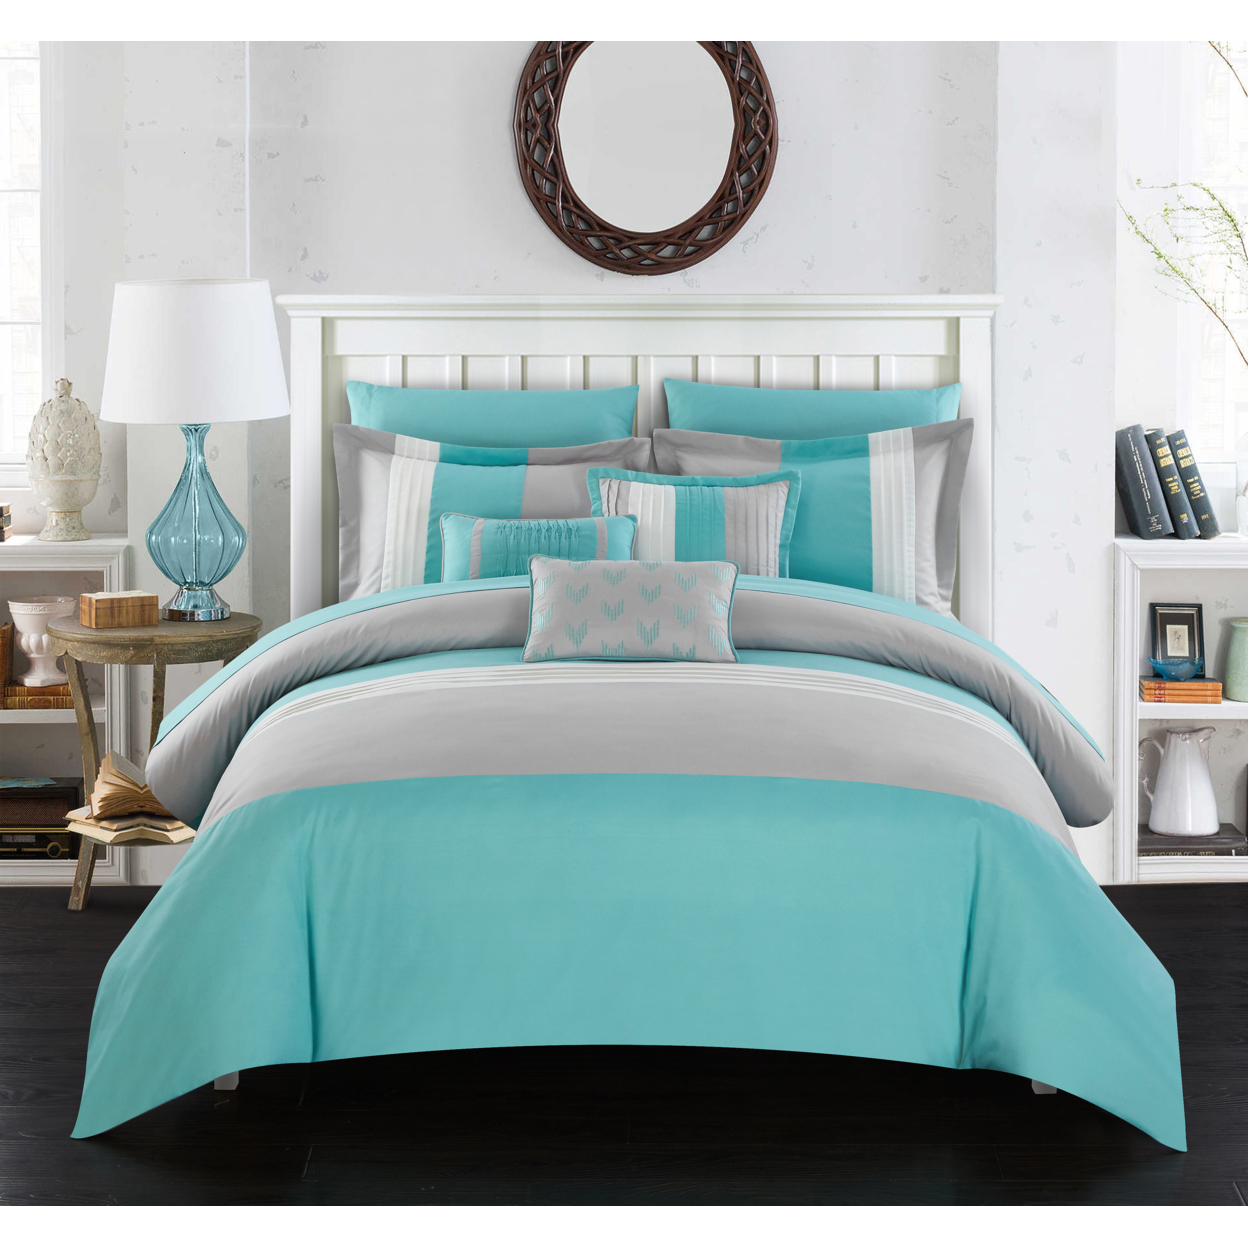 Rashi 10 Or 8 Piece Color Block Bed In A Bag Bedding And Comforter Set - Turquoise, Twin